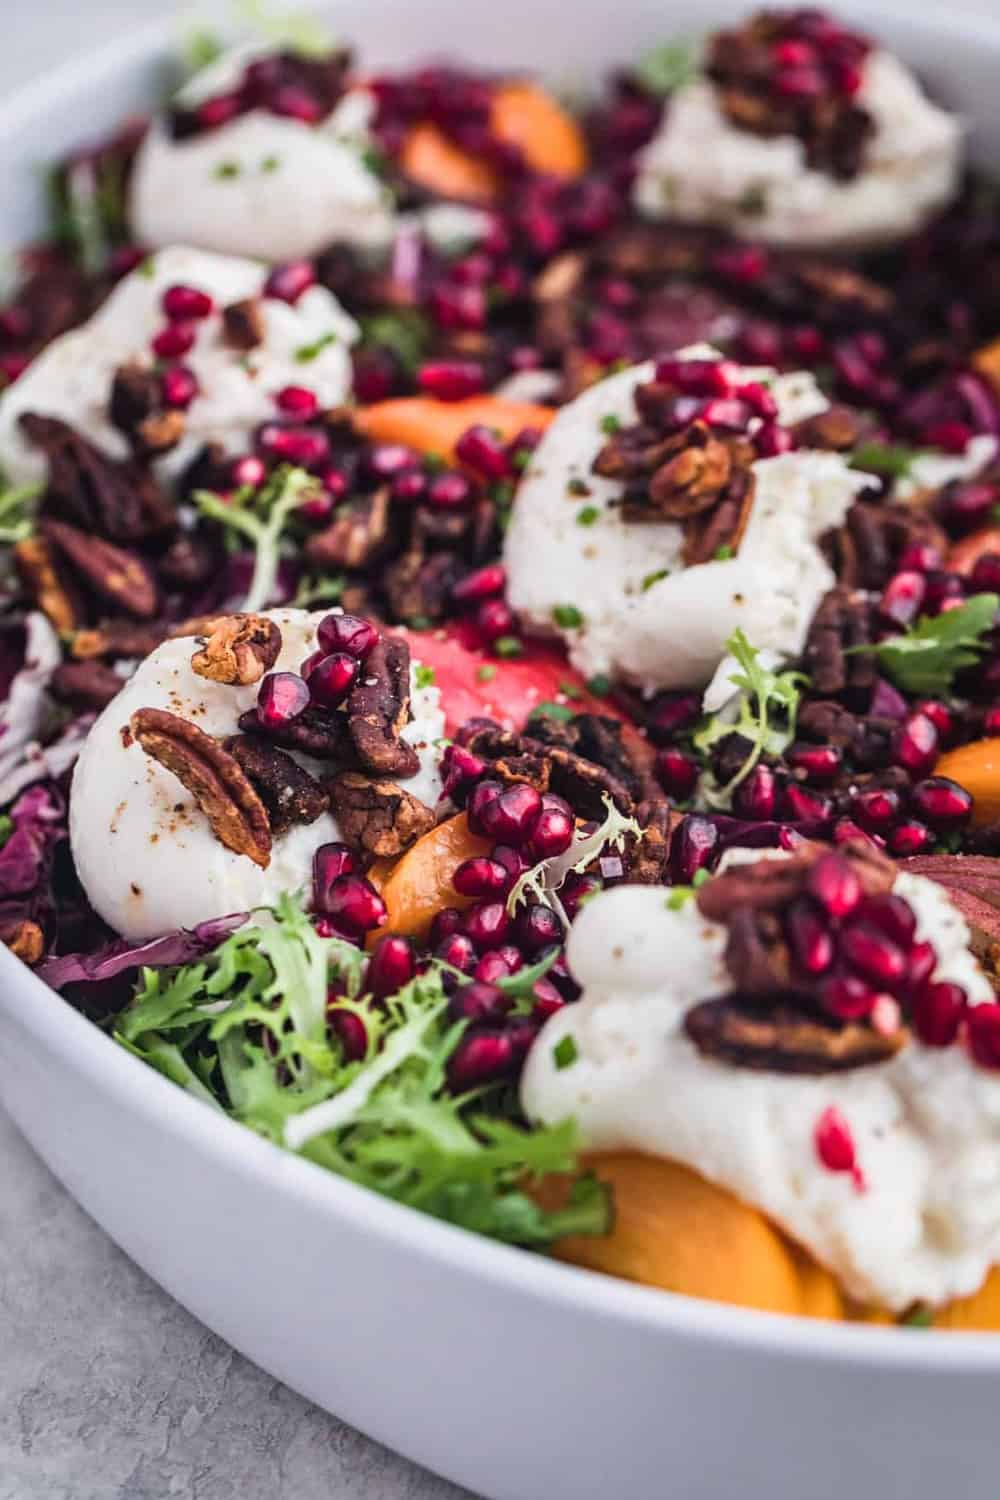 Frisee, radicchio, candied pecans, pears, pomegranates, persimmons, and burrata arranged on a serving plate. Side angle and up close shot.